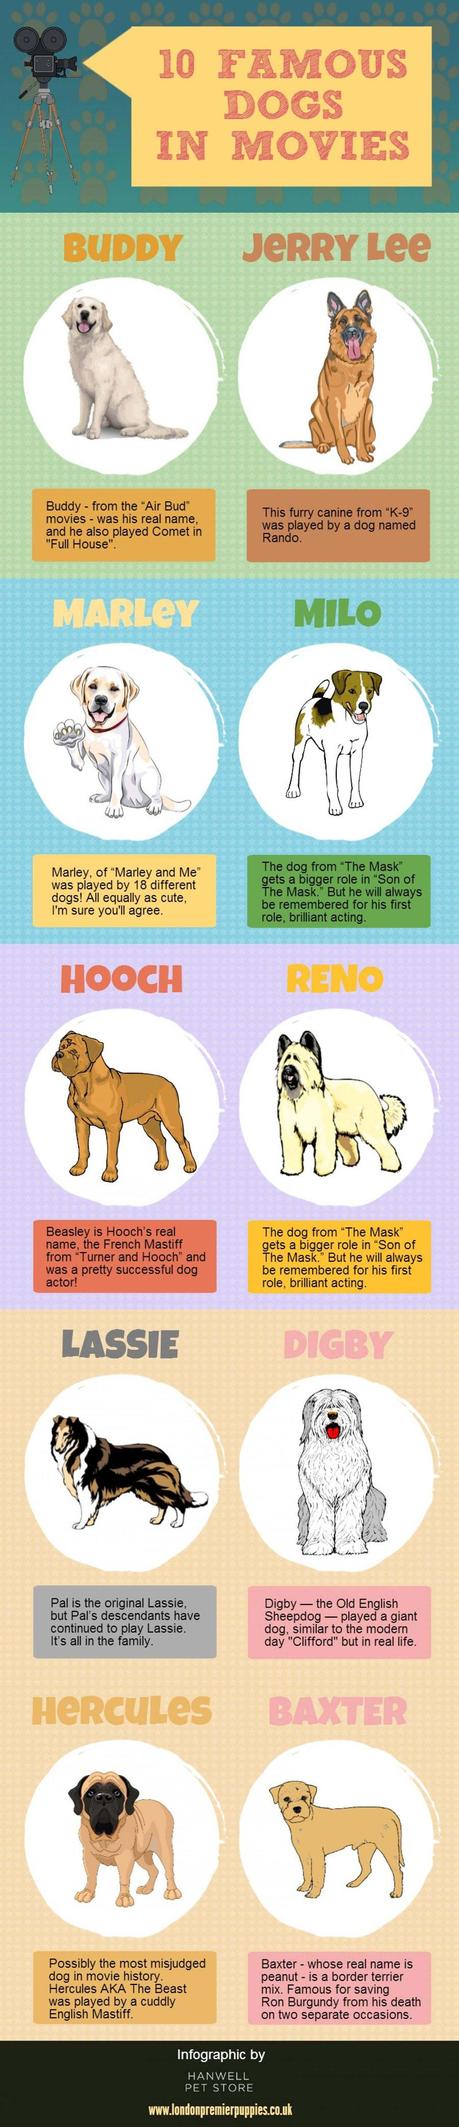 infographic-10-famous-dogs-in-film